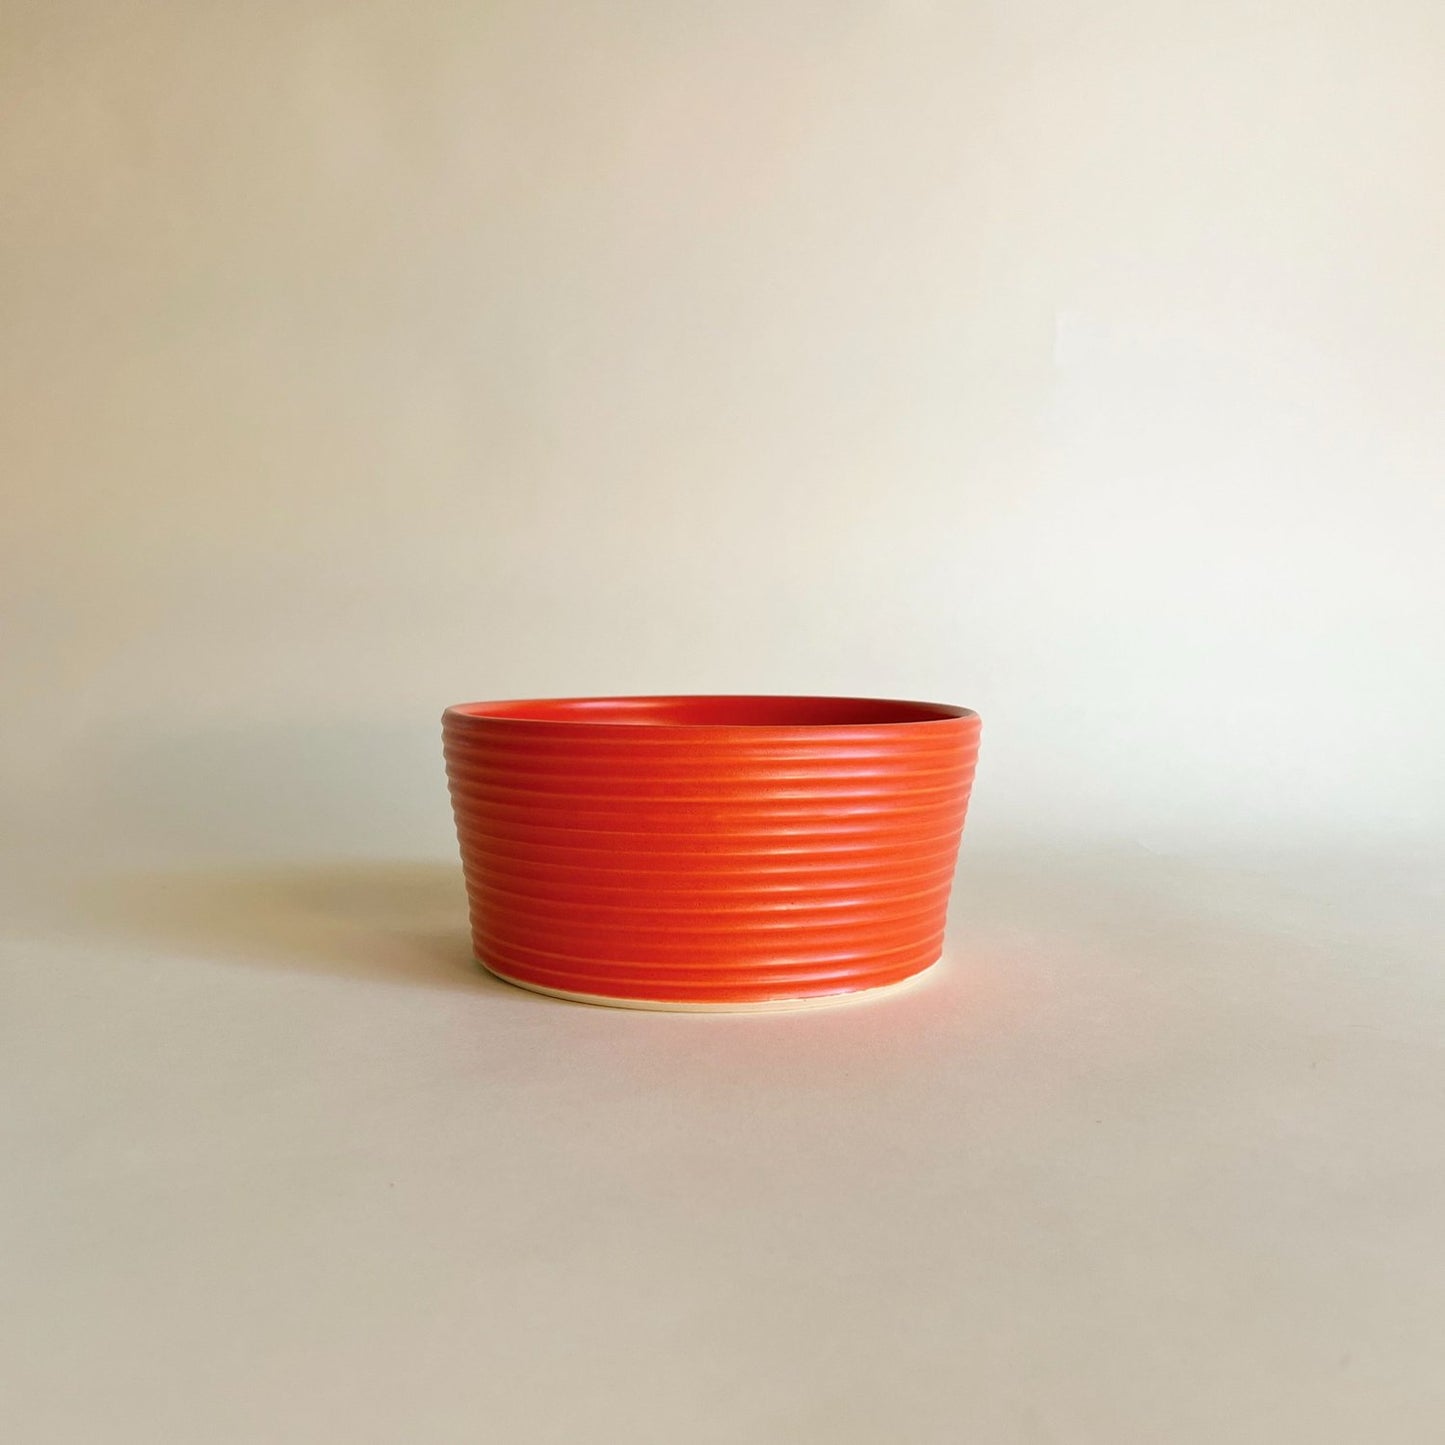 Wheel-thrown ribbed ceramic stoneware dinner bowl with handmade glaze in red color. 6" x 2.5"